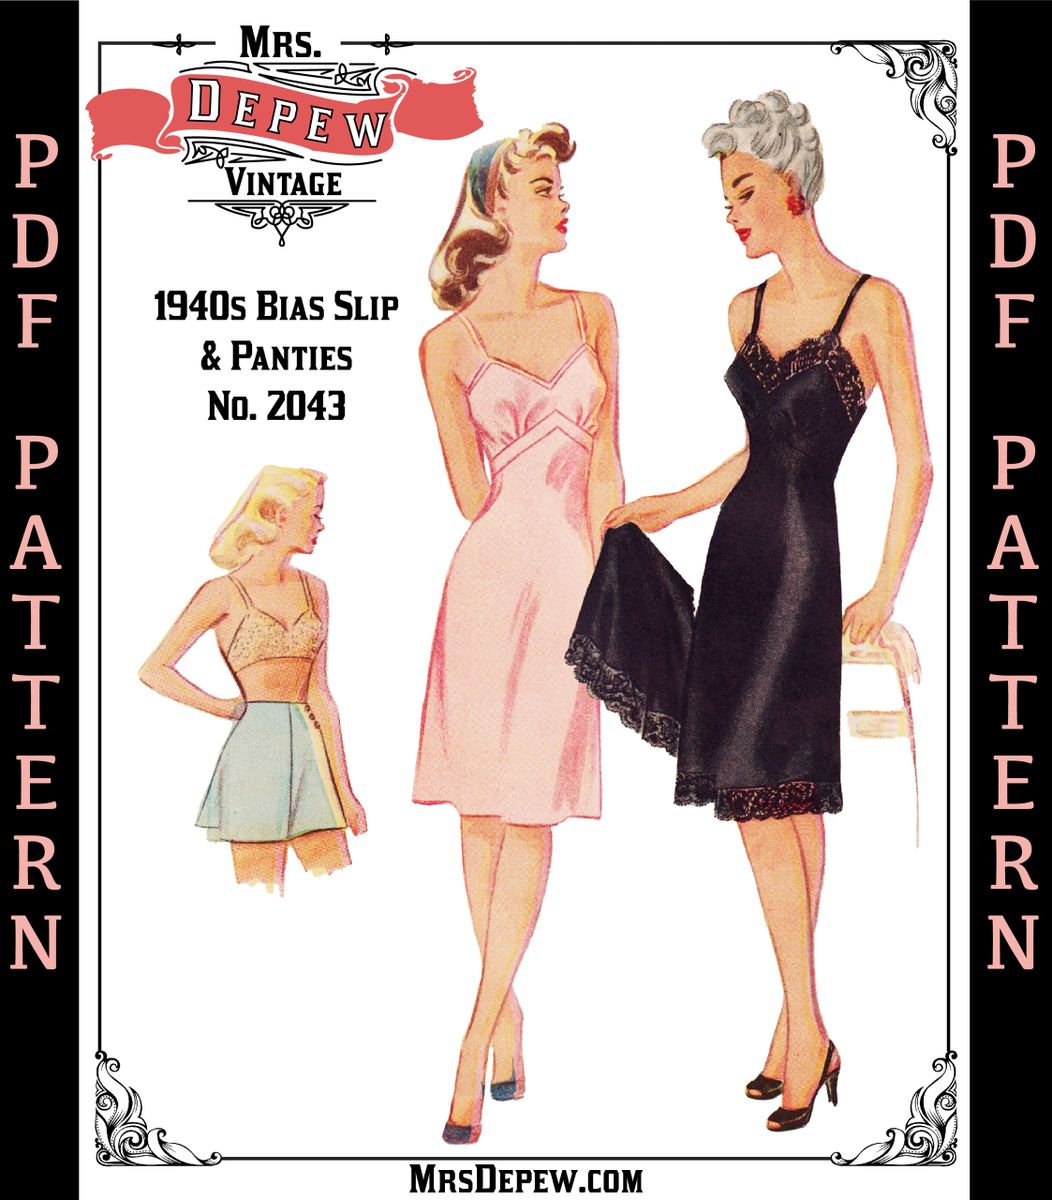 Vintage Sewing Pattern 1940s Bias-Cut Slip and Panties Depew #2043  Multisize 32-50 Inch Bust -INSTANT DOWNLOAD